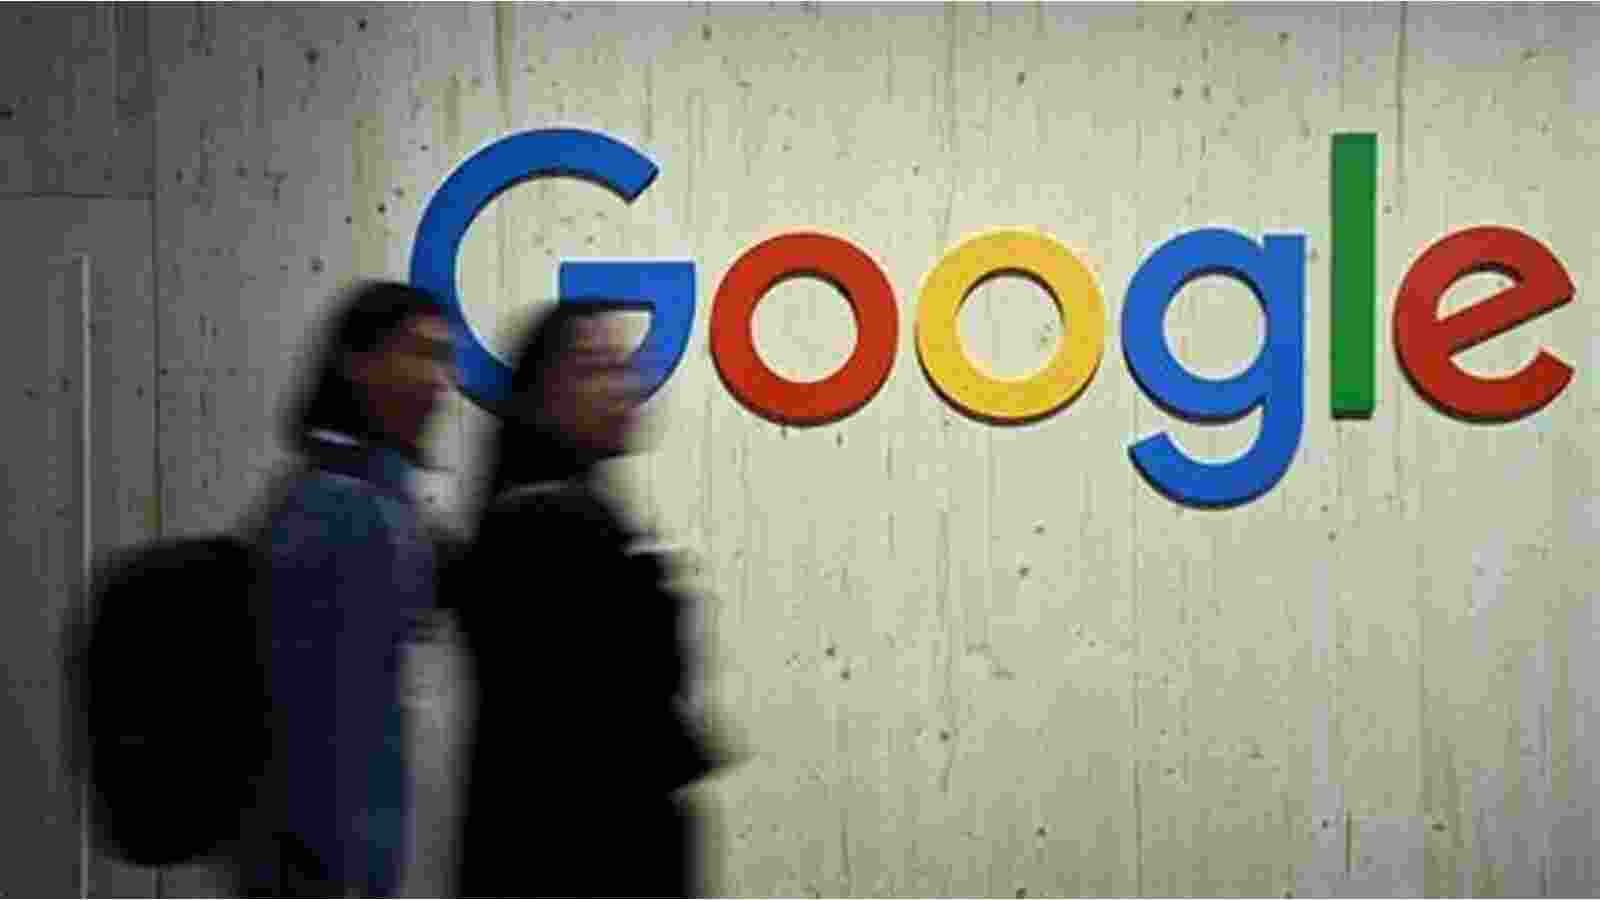 Google announced it has taken a stake in Taiwan's New Green Power (NGP) and could purchase up to 300 megawatts of renewable energy from the BlackRock fund-owned firm.